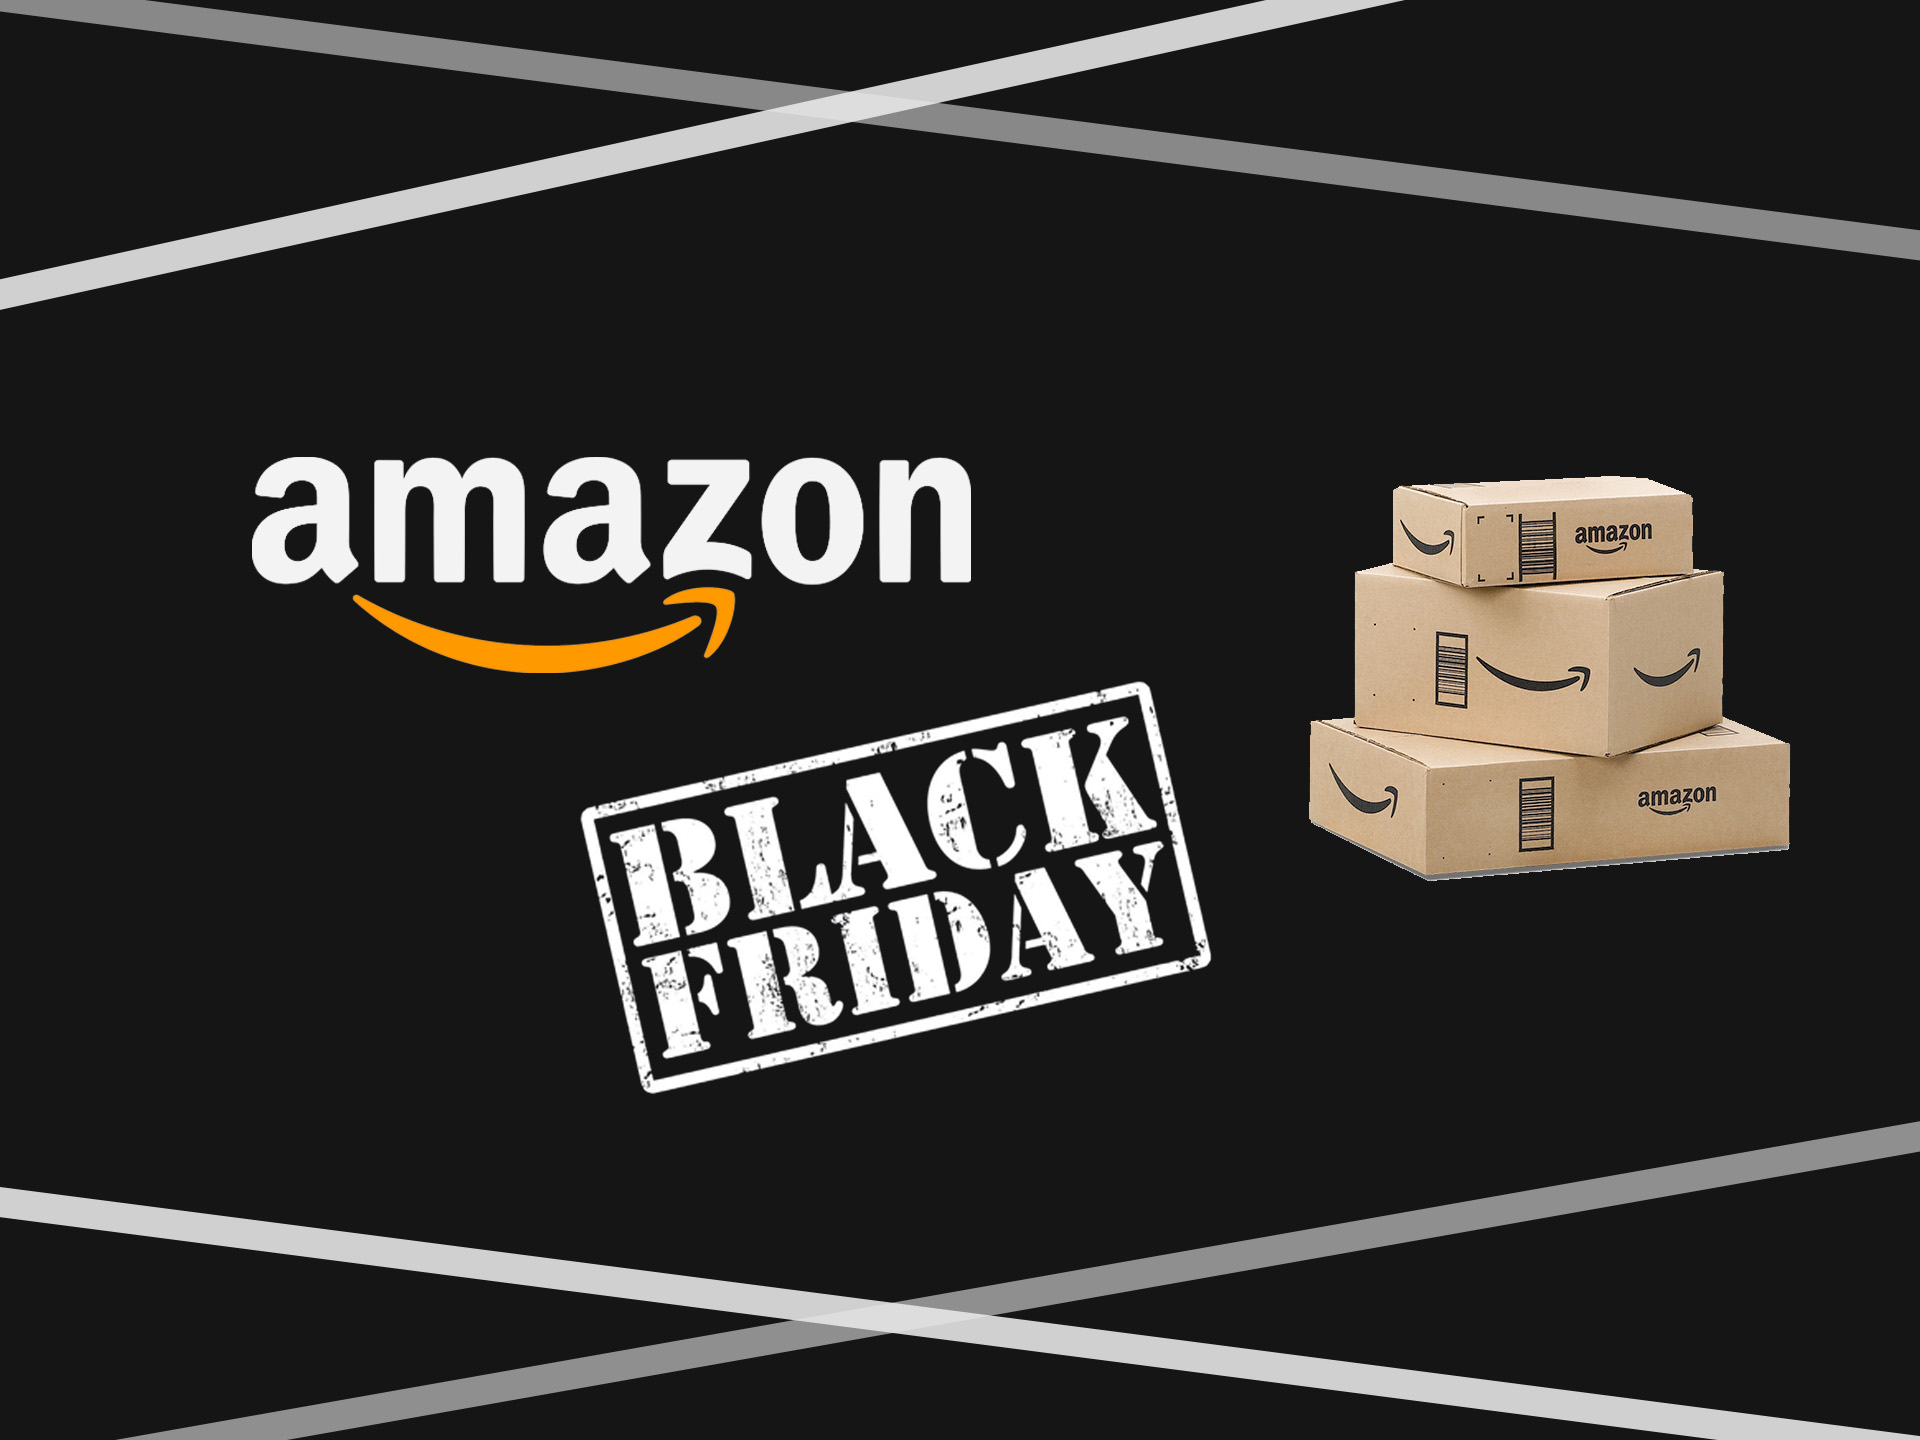 Black Friday week continues: here are the top 10 best-selling deals today